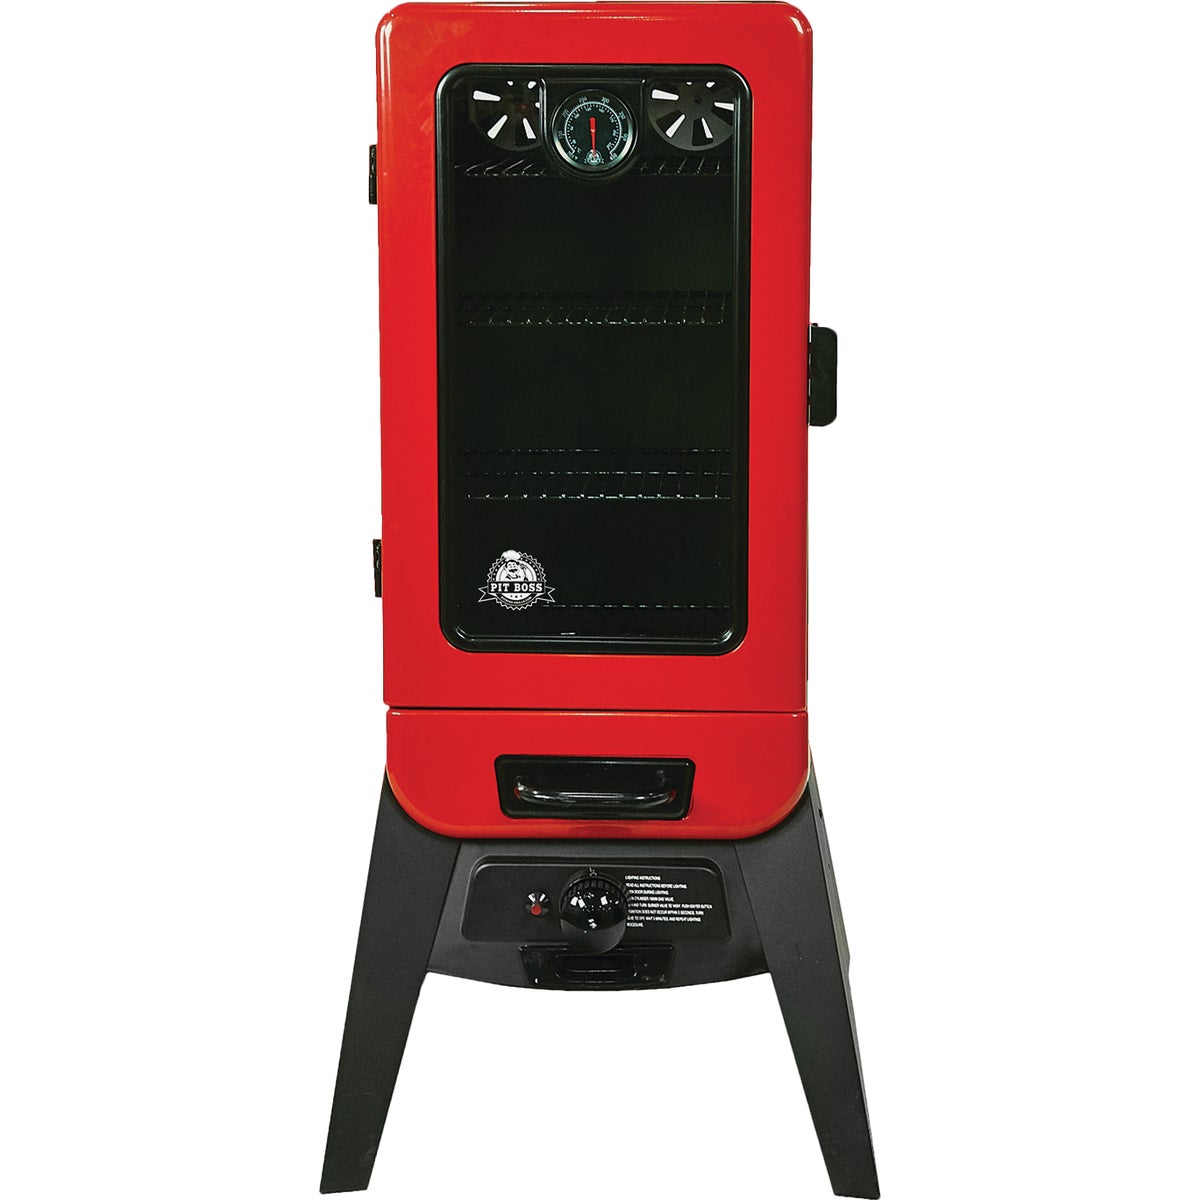 Item 800033, Theres a new boss in town - the Pit Boss Red Rock Gas Smoker Series.